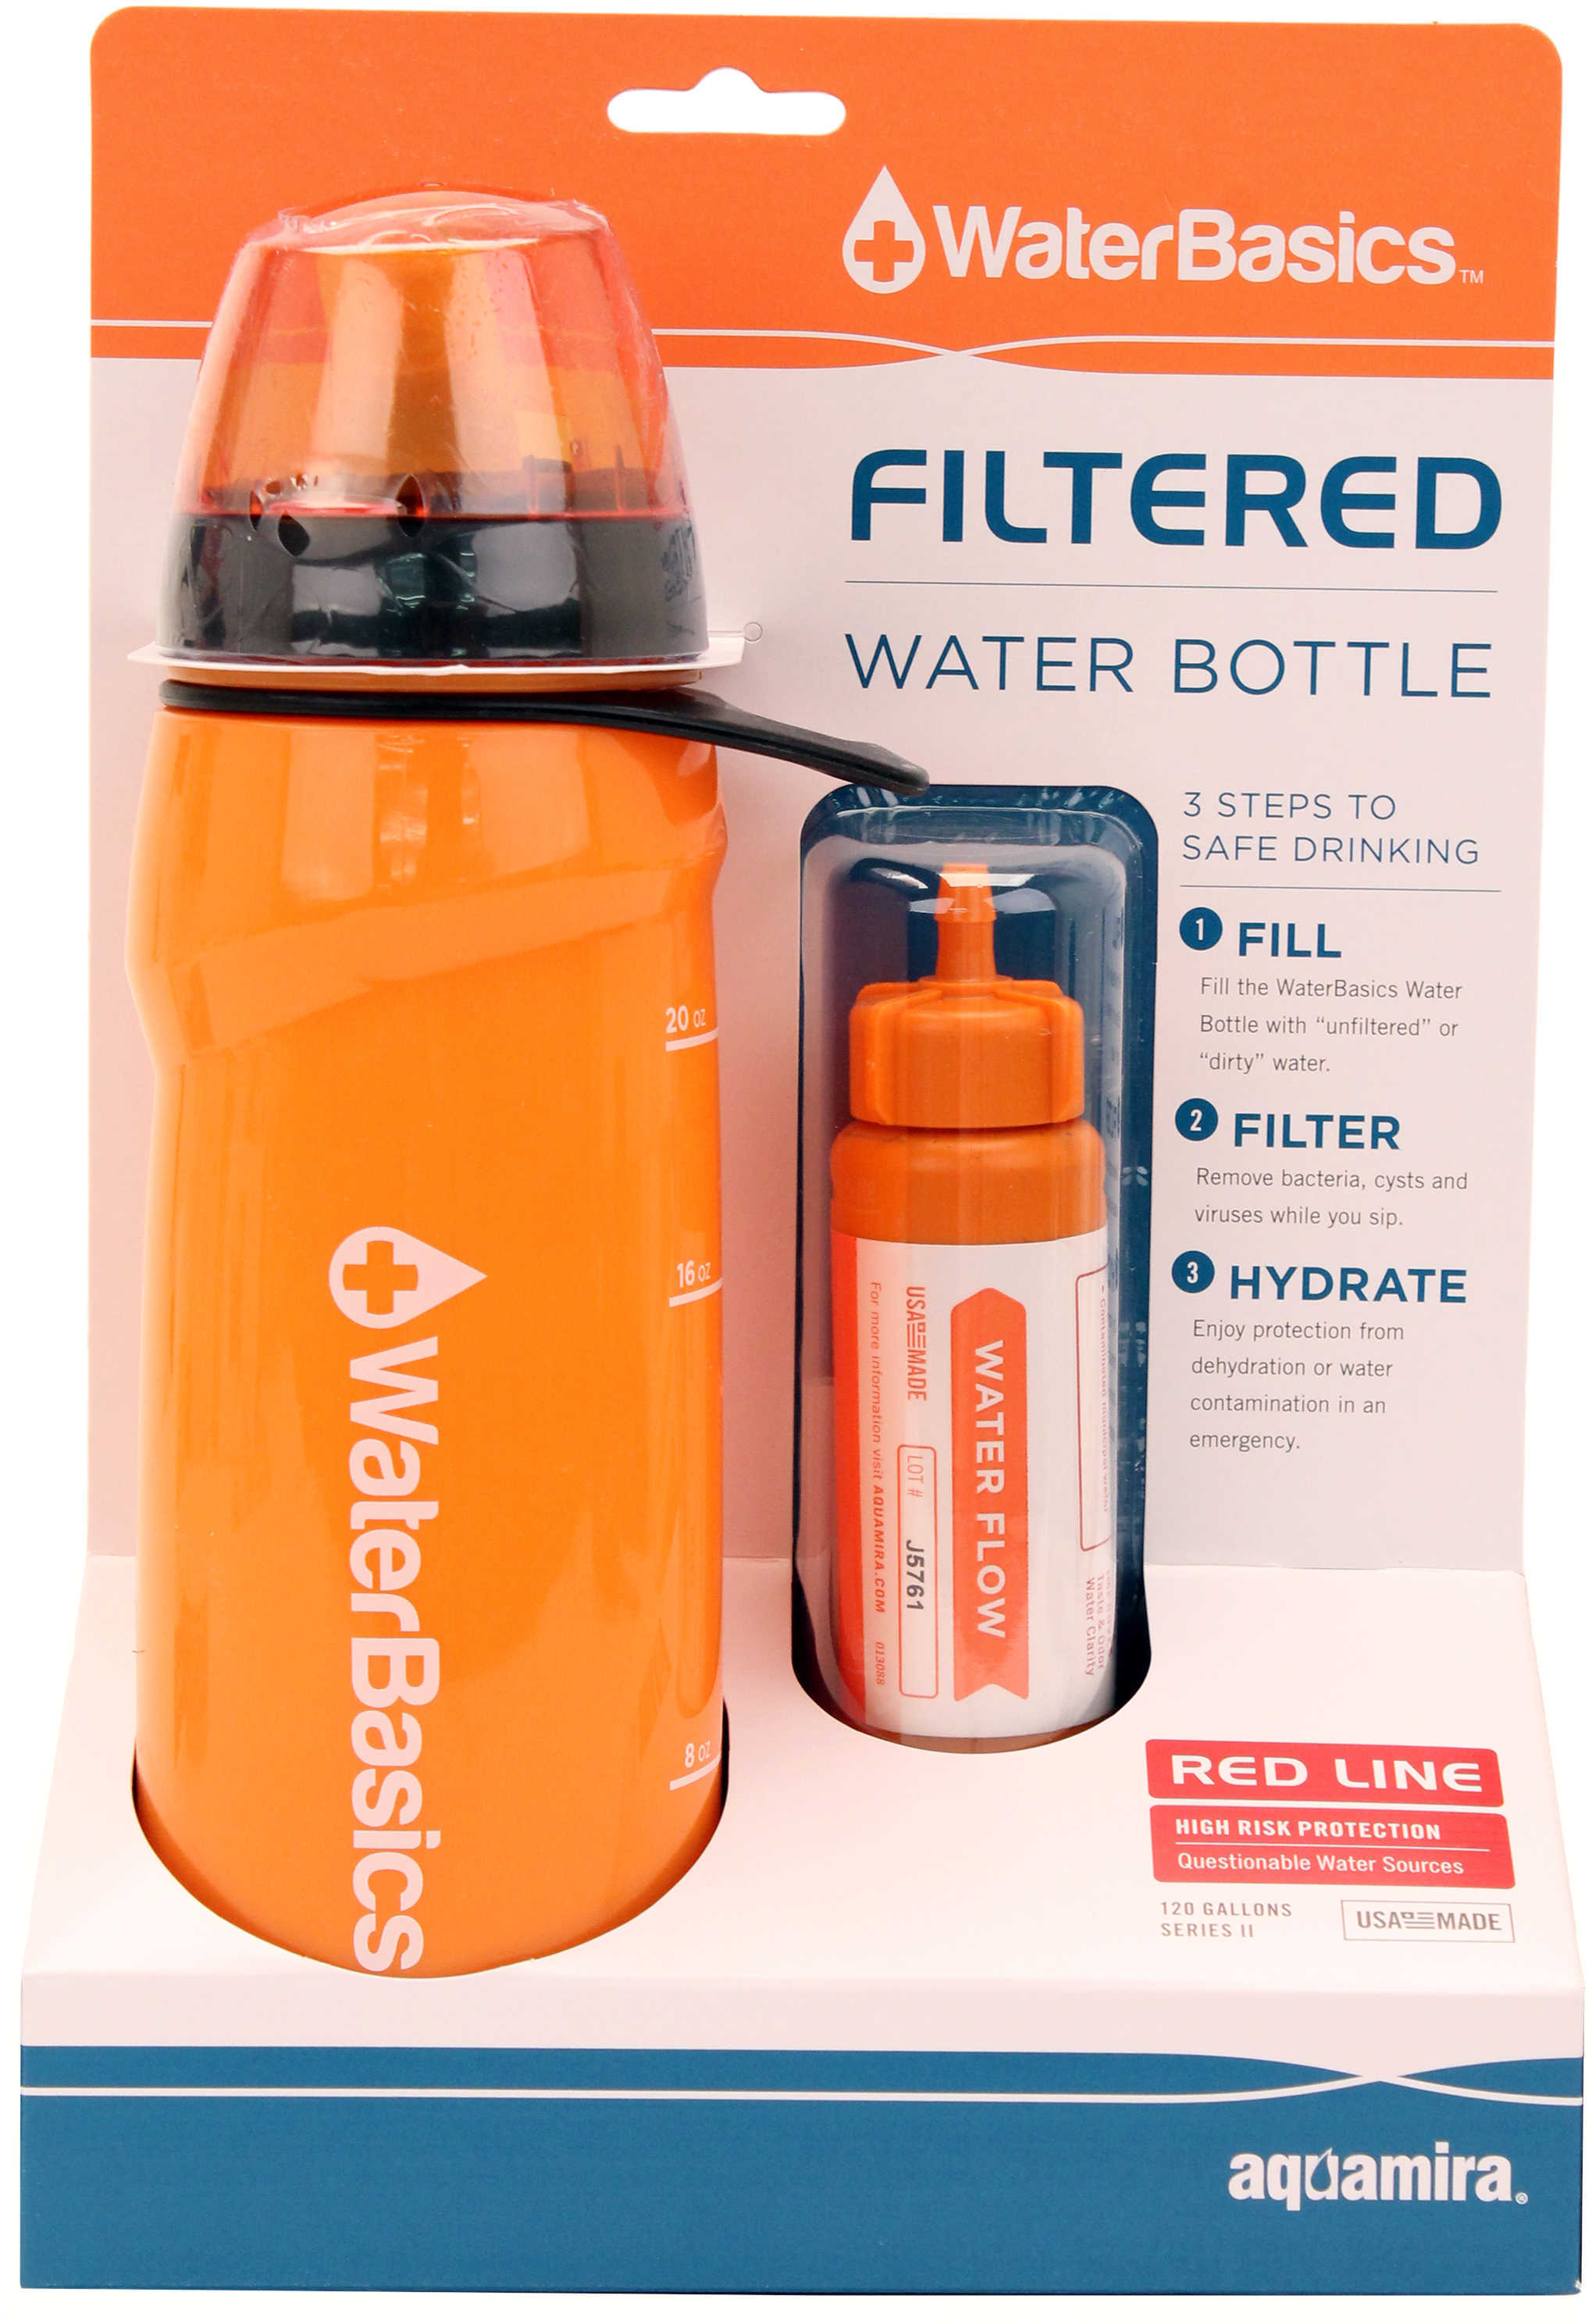 Aquamira WaterBasics Filter Bottle Red Line - Virus Bacteria and Cyst Protection Filters up to 120 Gallons of